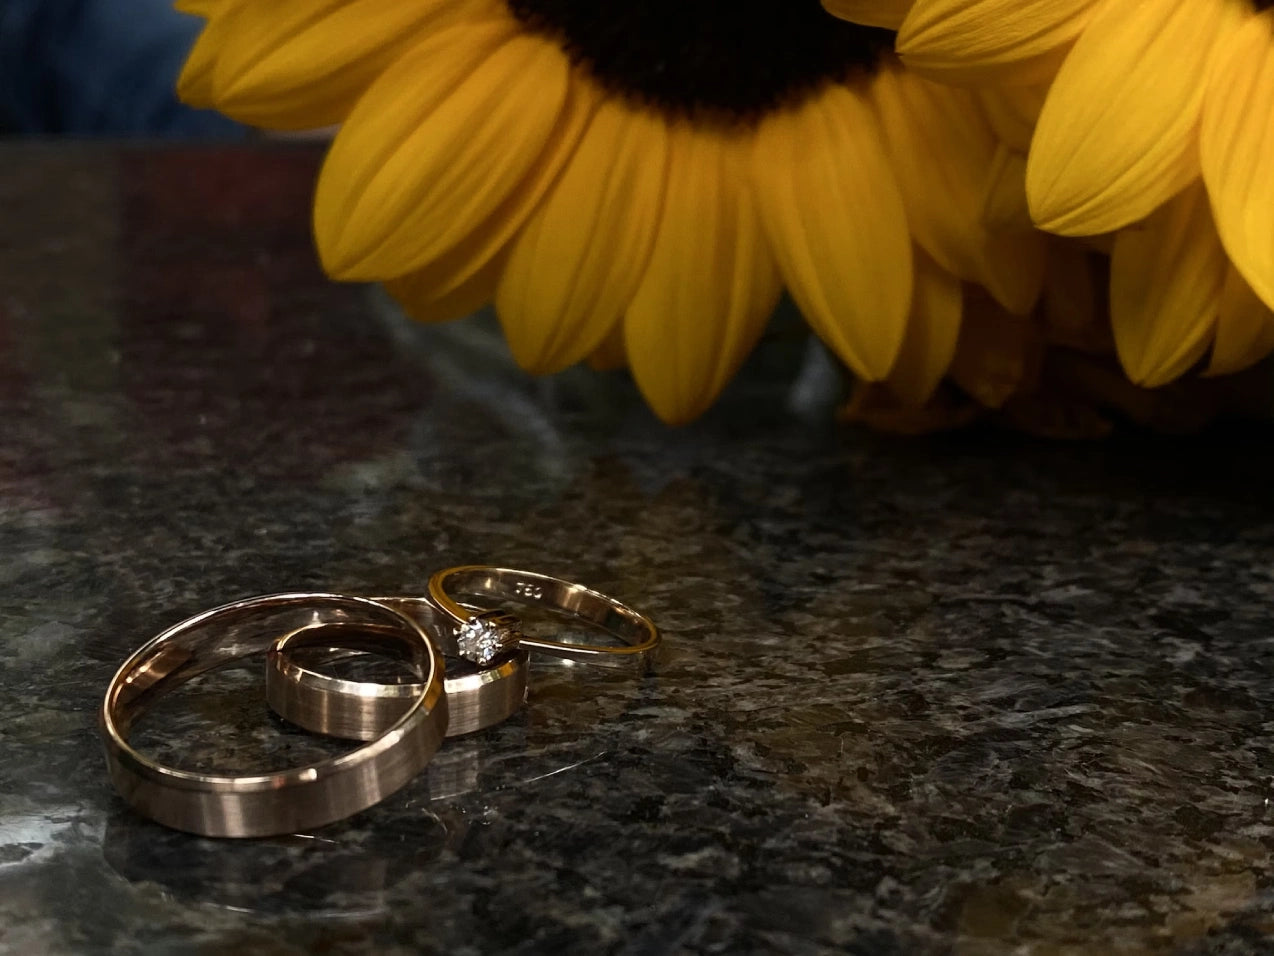 Engagement rings are placed besides the yellow color sunflower